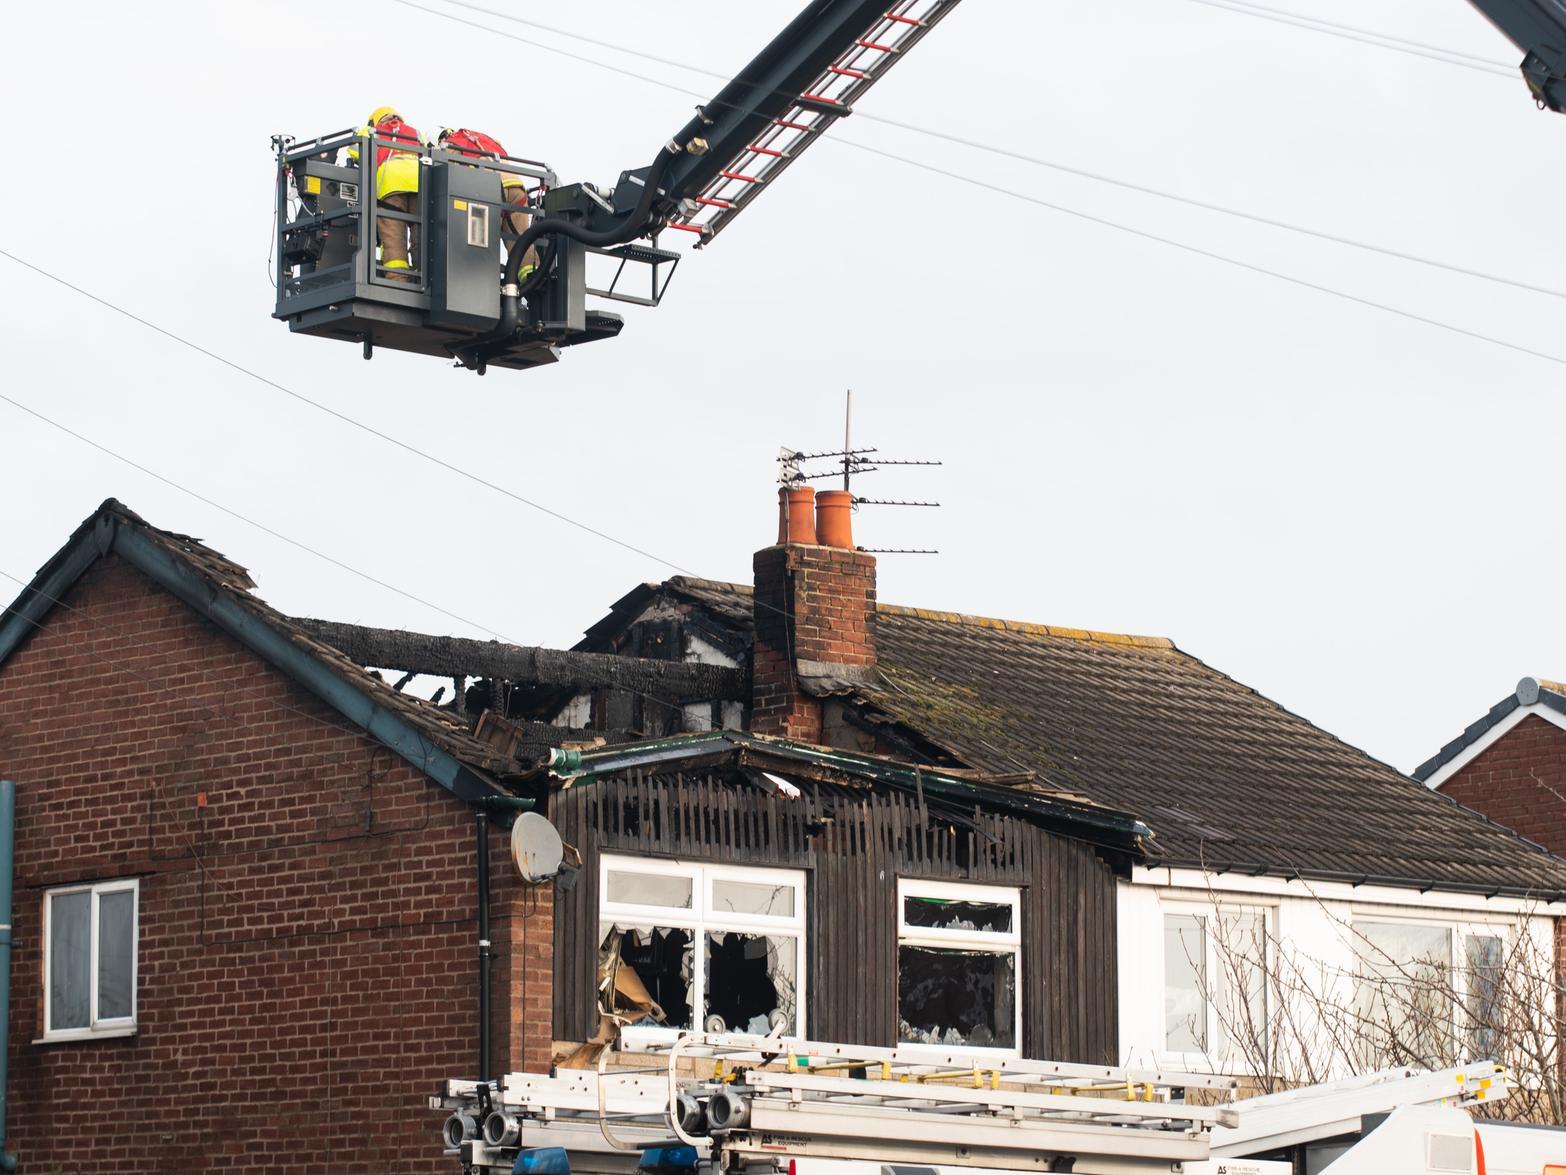 More than a dozen dogs were rescued from a house fire in Hambleton last month. It took six fire crews to tackle the blaze, which badly damaged the property. Three people were taken to hospital.